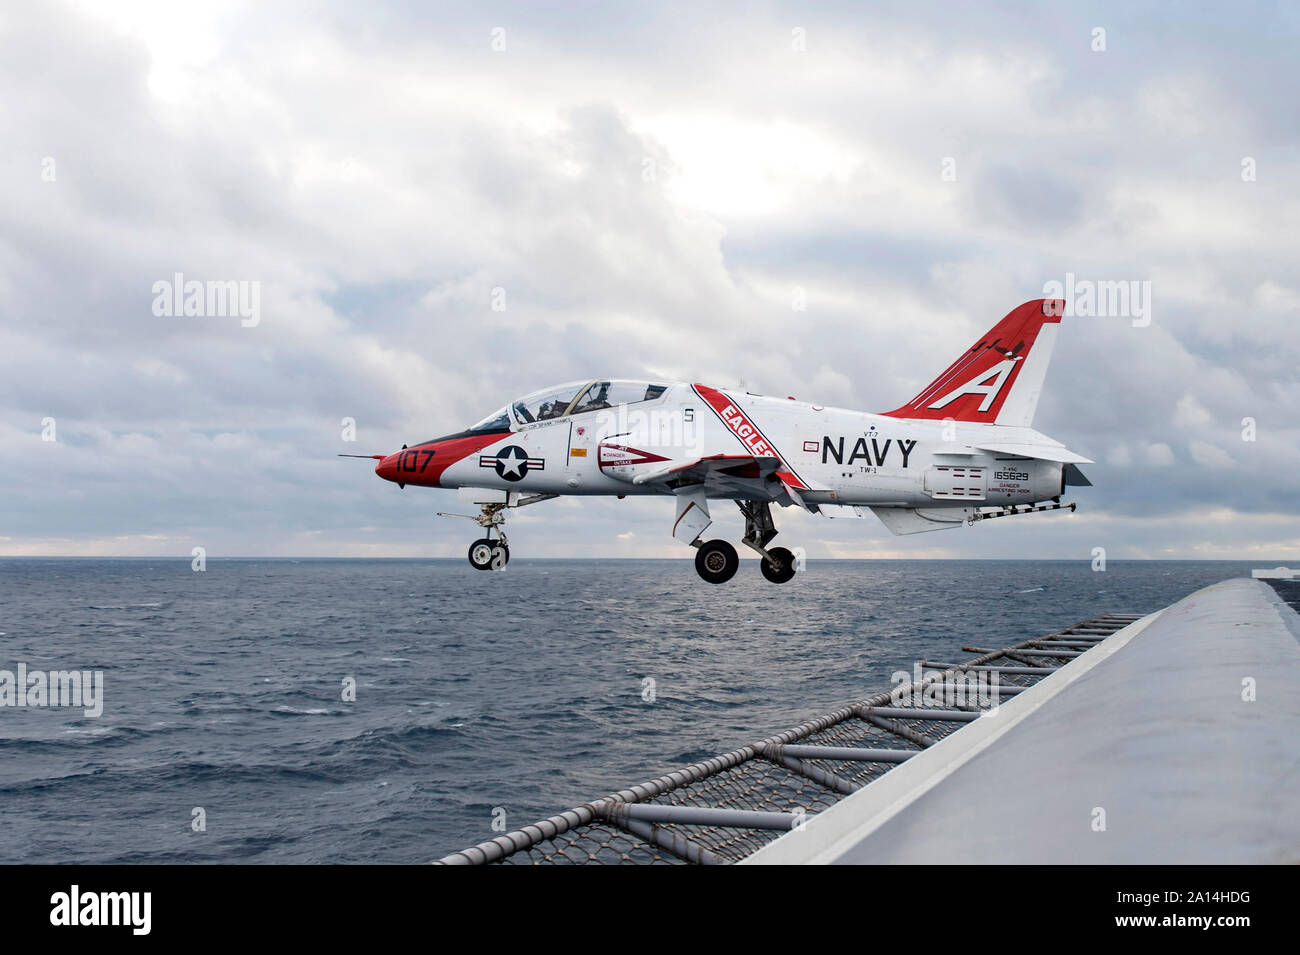 A T-45C Goshawk training aircraft launches from the flight deck of USS Harry S. Truman. Stock Photo